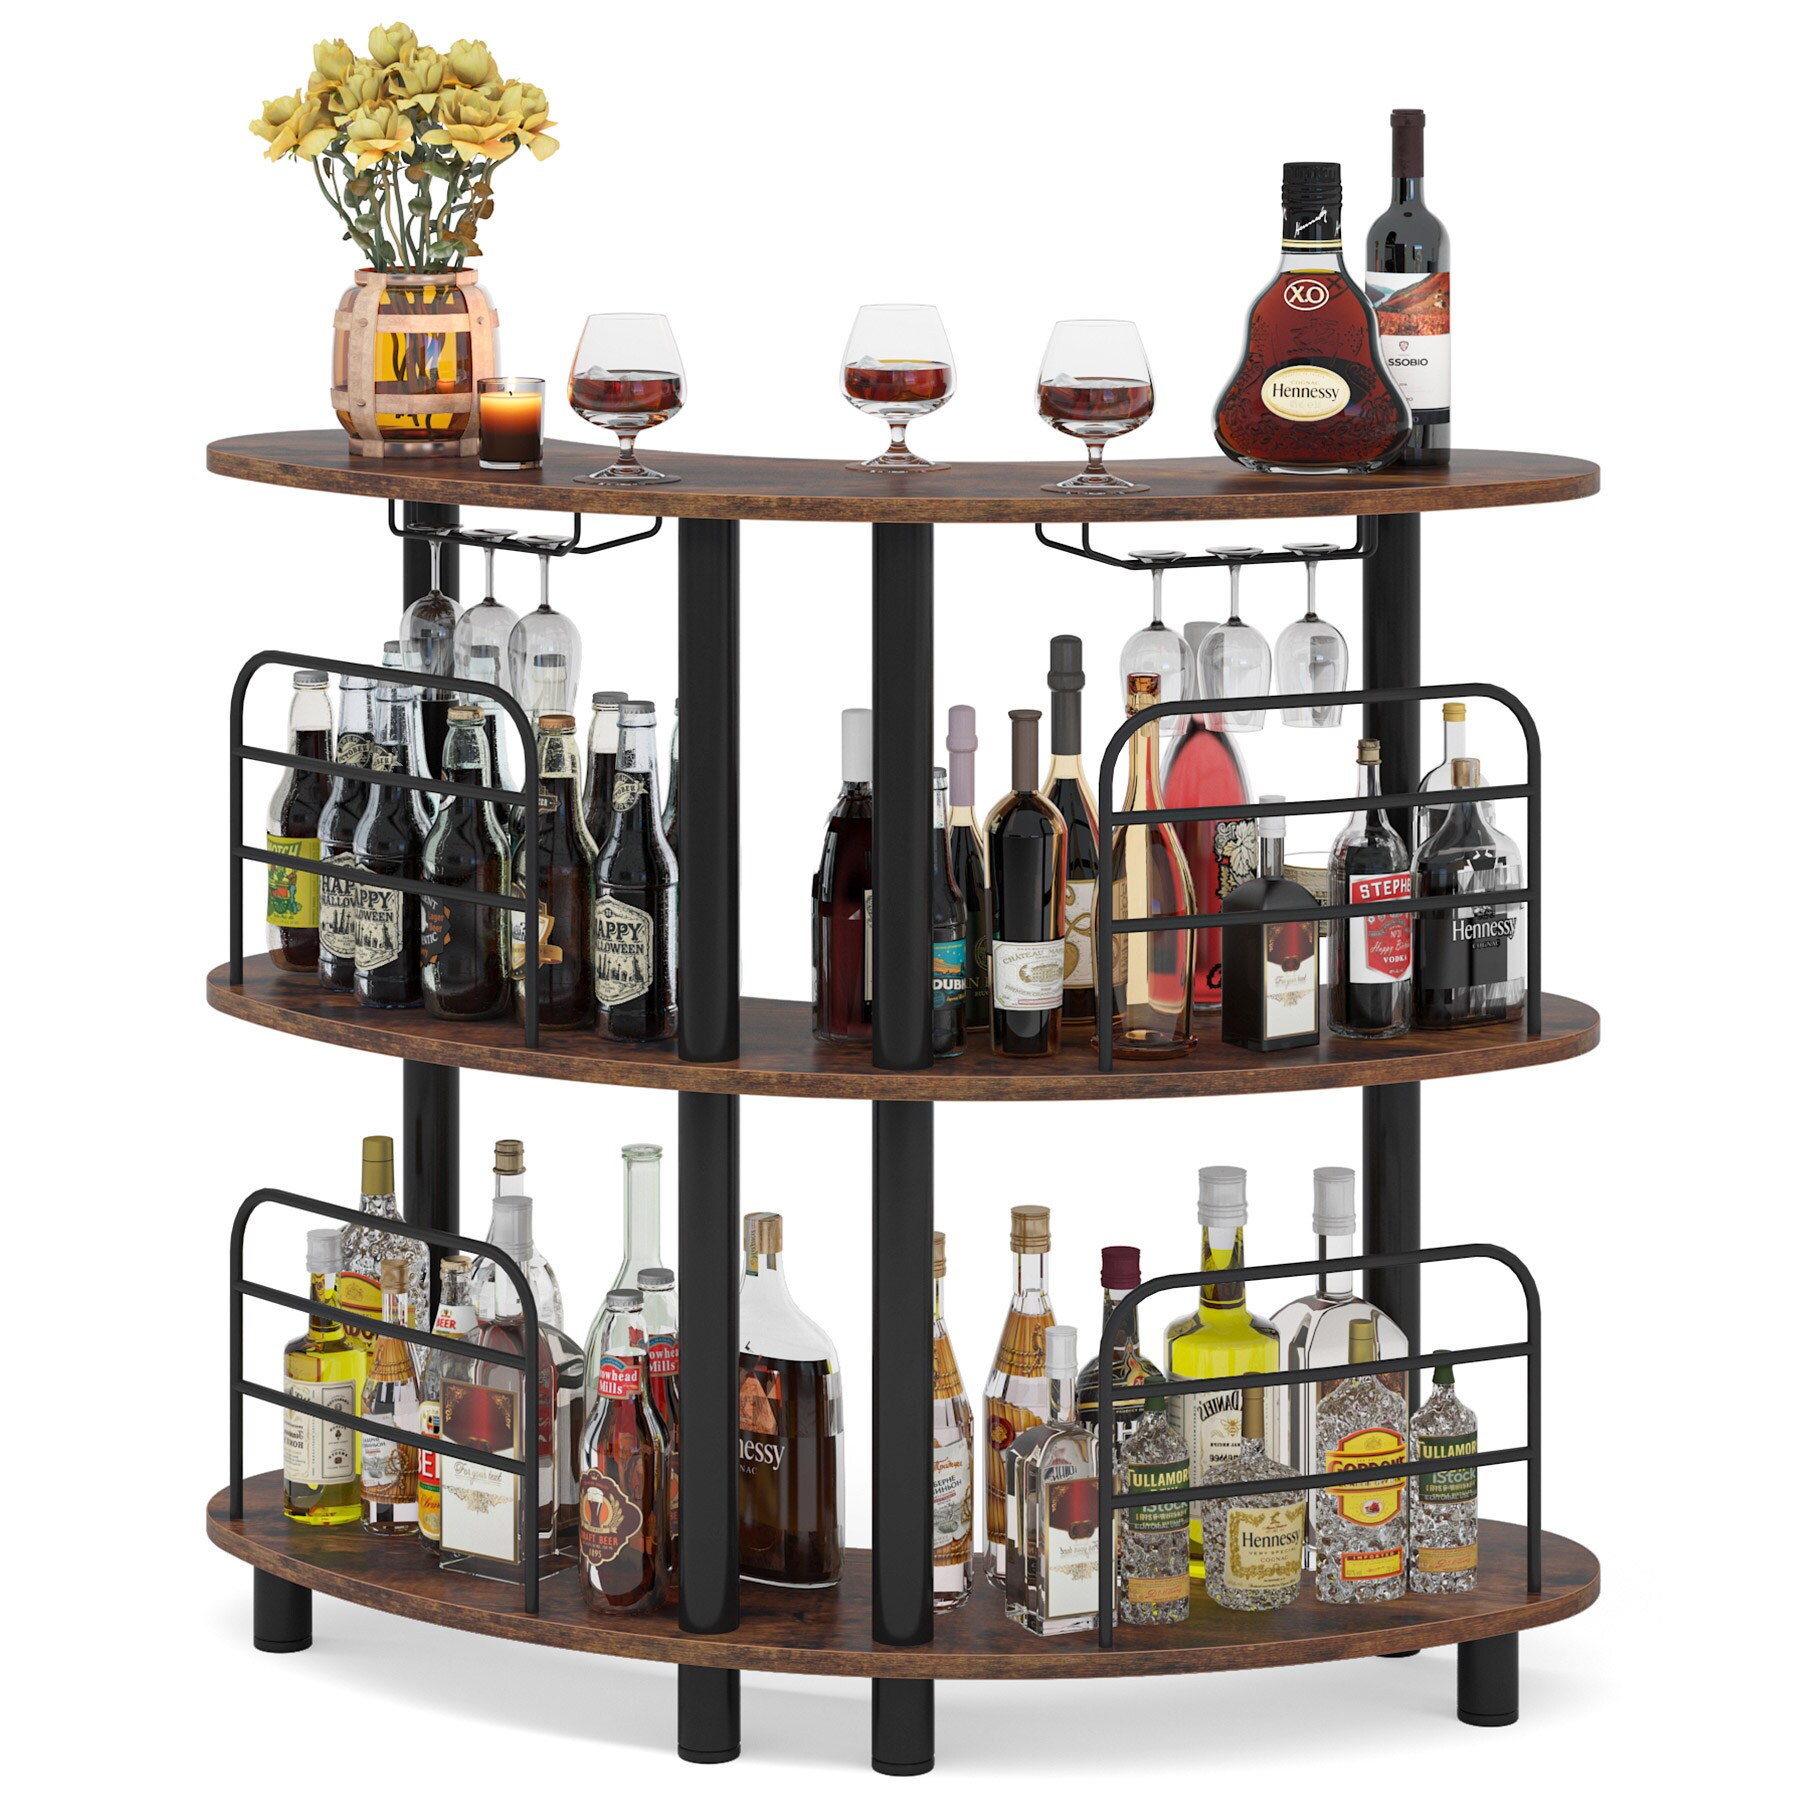 Half Moon Black Bar Unit Tempered Glass Table Contemporary Wine Beverage Drink